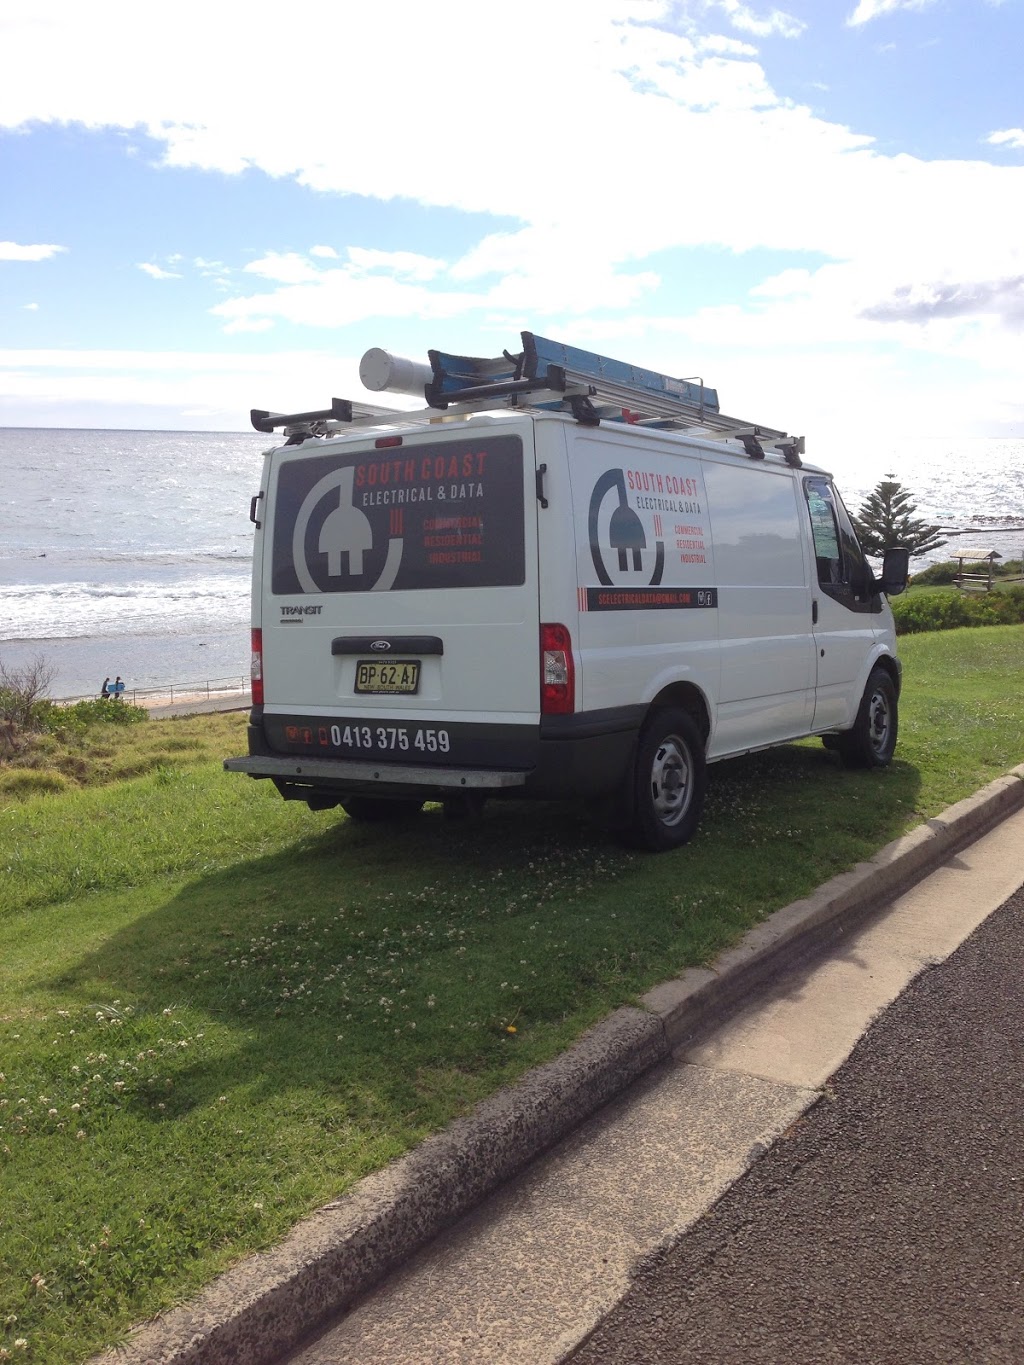 South Coast Electrical and Data | electrician | 137 Headland Dr, Gerroa NSW 2534, Australia | 0413375459 OR +61 413 375 459